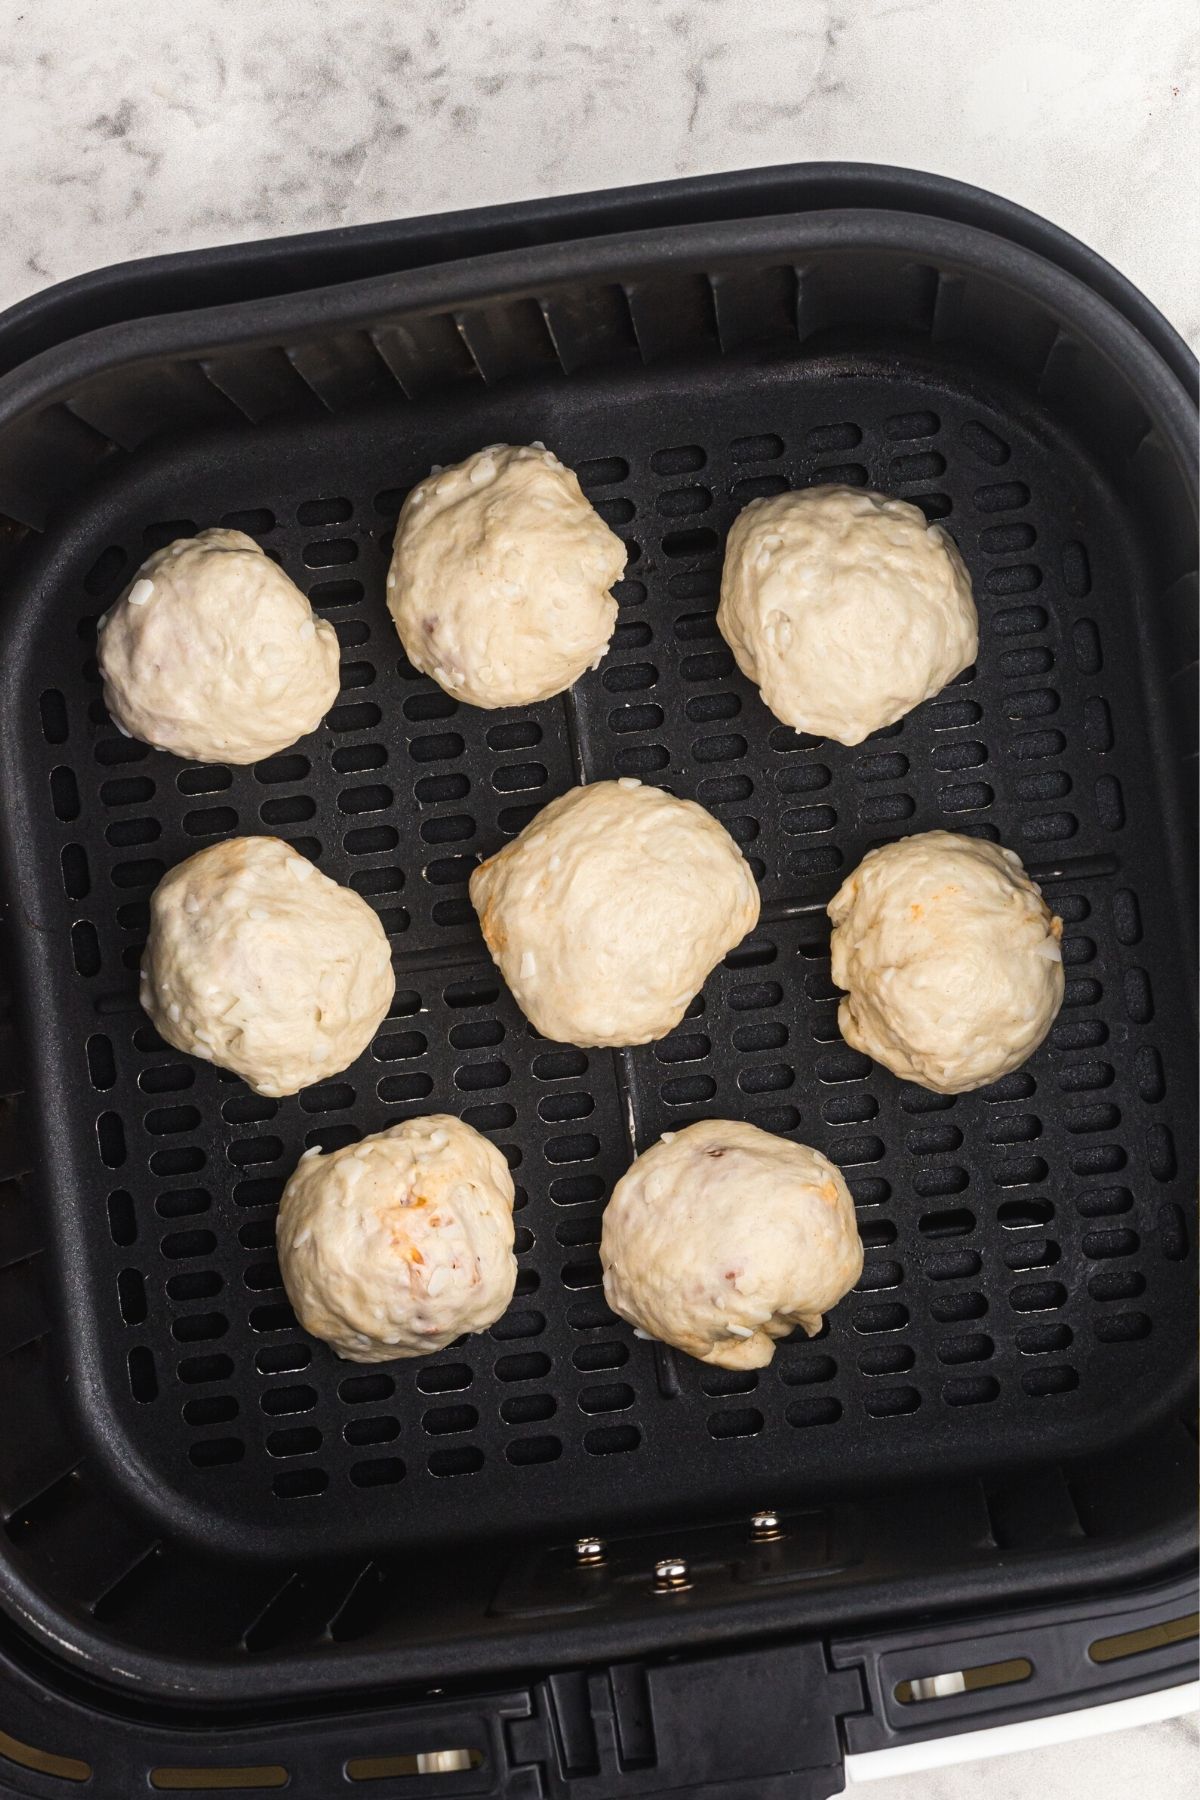 Biscuits filled with pizza toppings, wrapped into balls placed in the air fryer basket